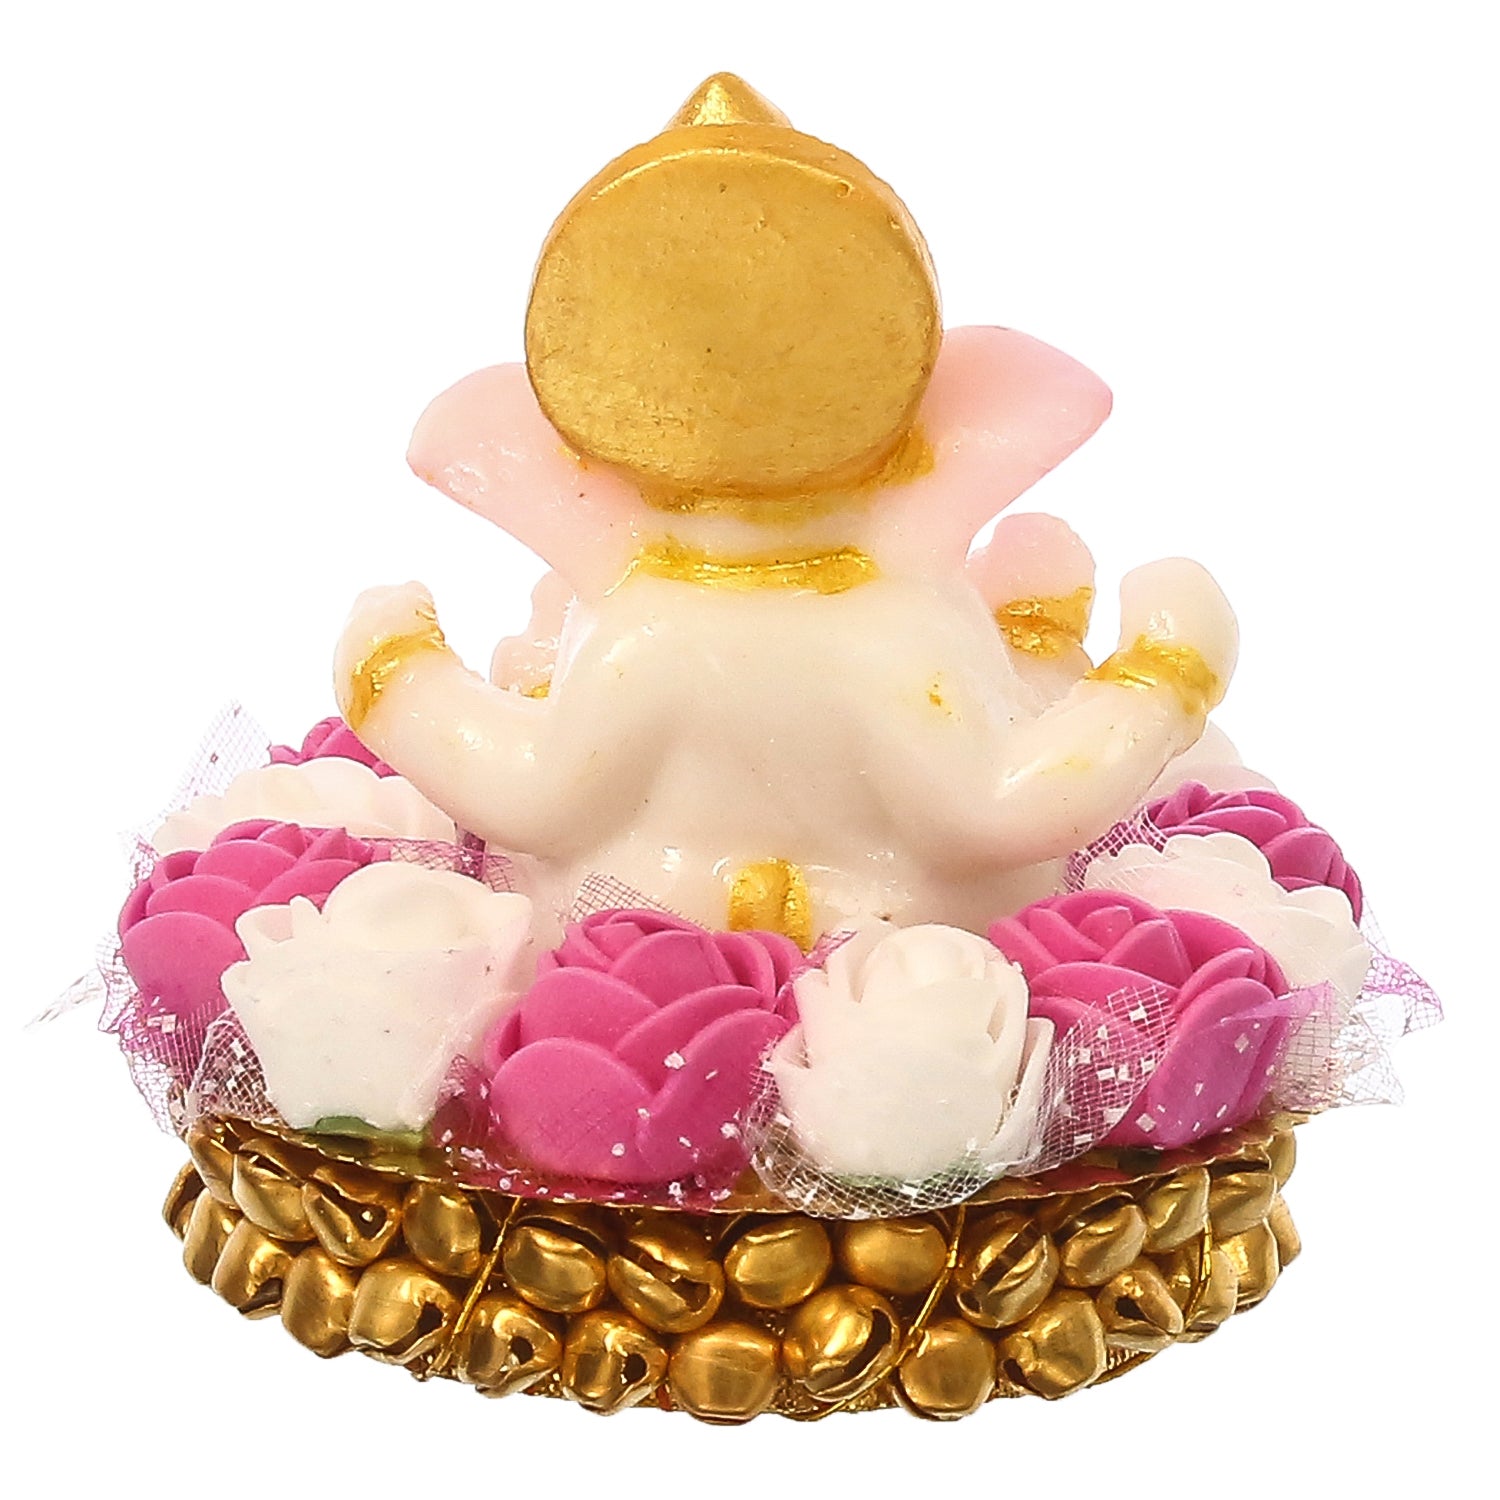 Golden and White Polyresin Lord Ganesha Idol on Decorative Handcrafted Plate with Pink and White Flowers 6